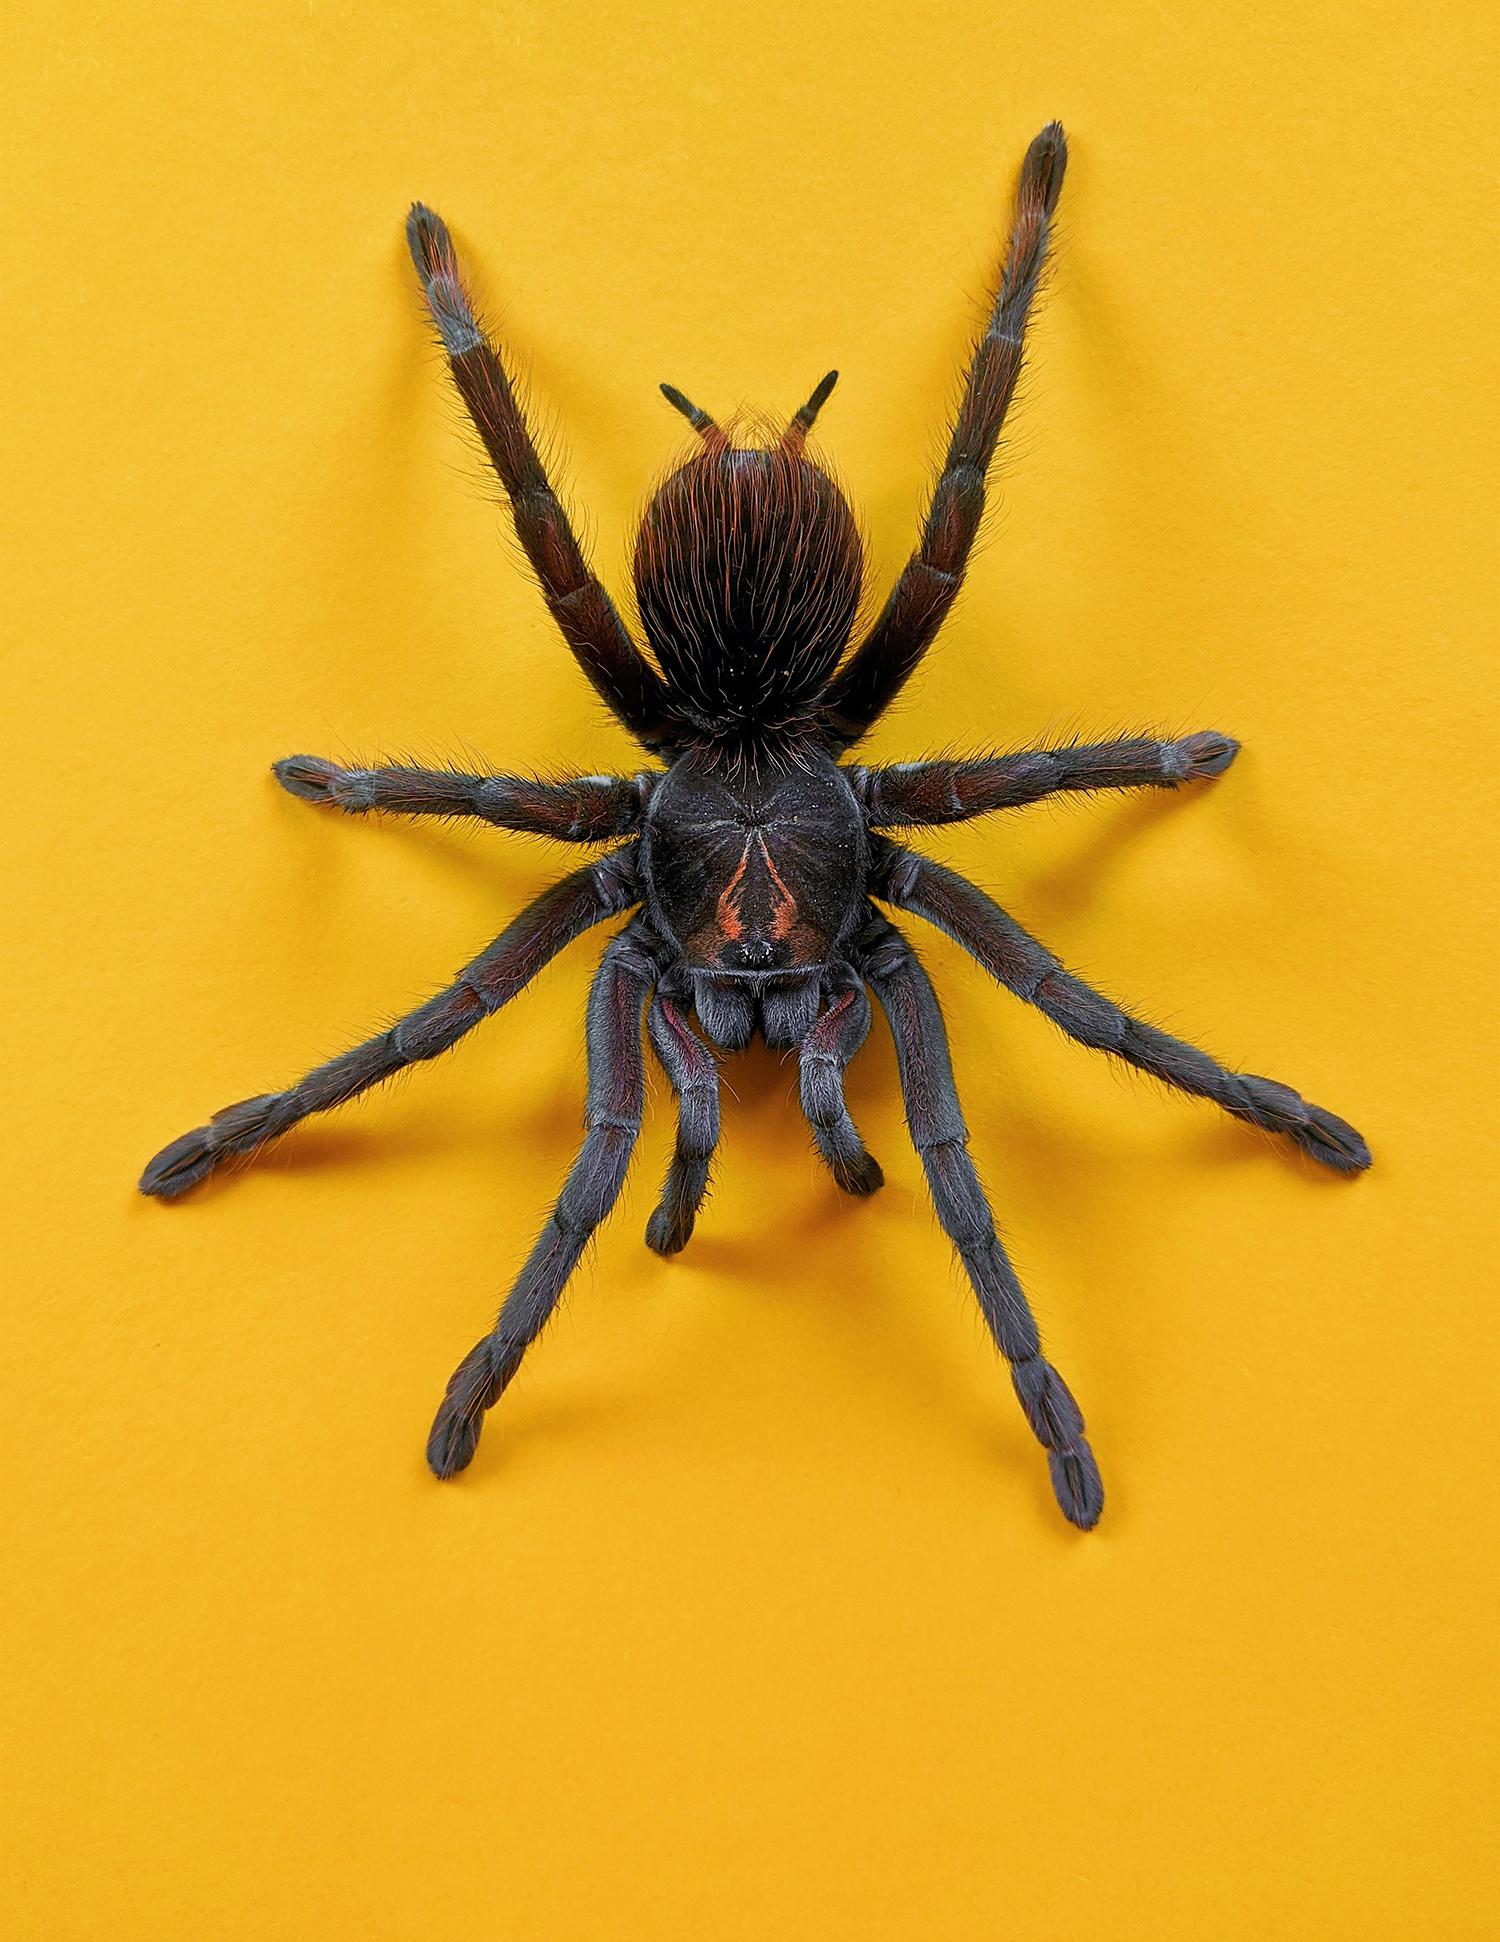 5 Simple Steps to Get Rid of Spiders